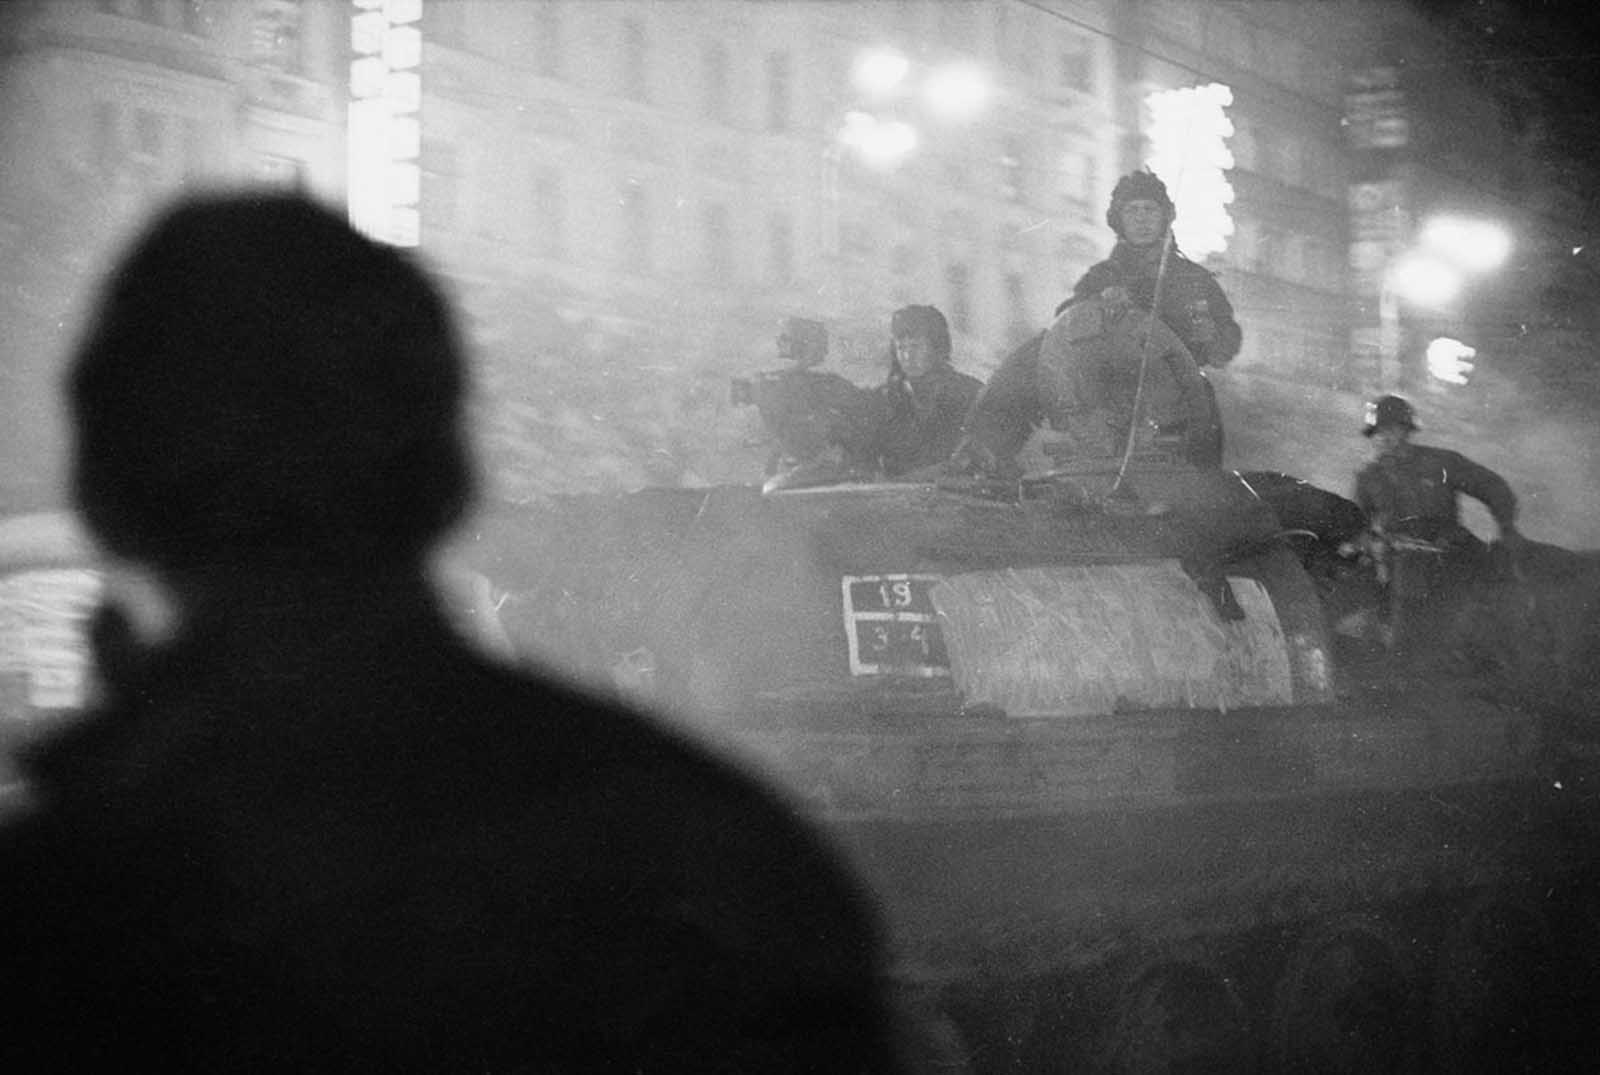 A shadowy figure watches Soviet tanks advance through the streets of Prague after nightfall in August 1968